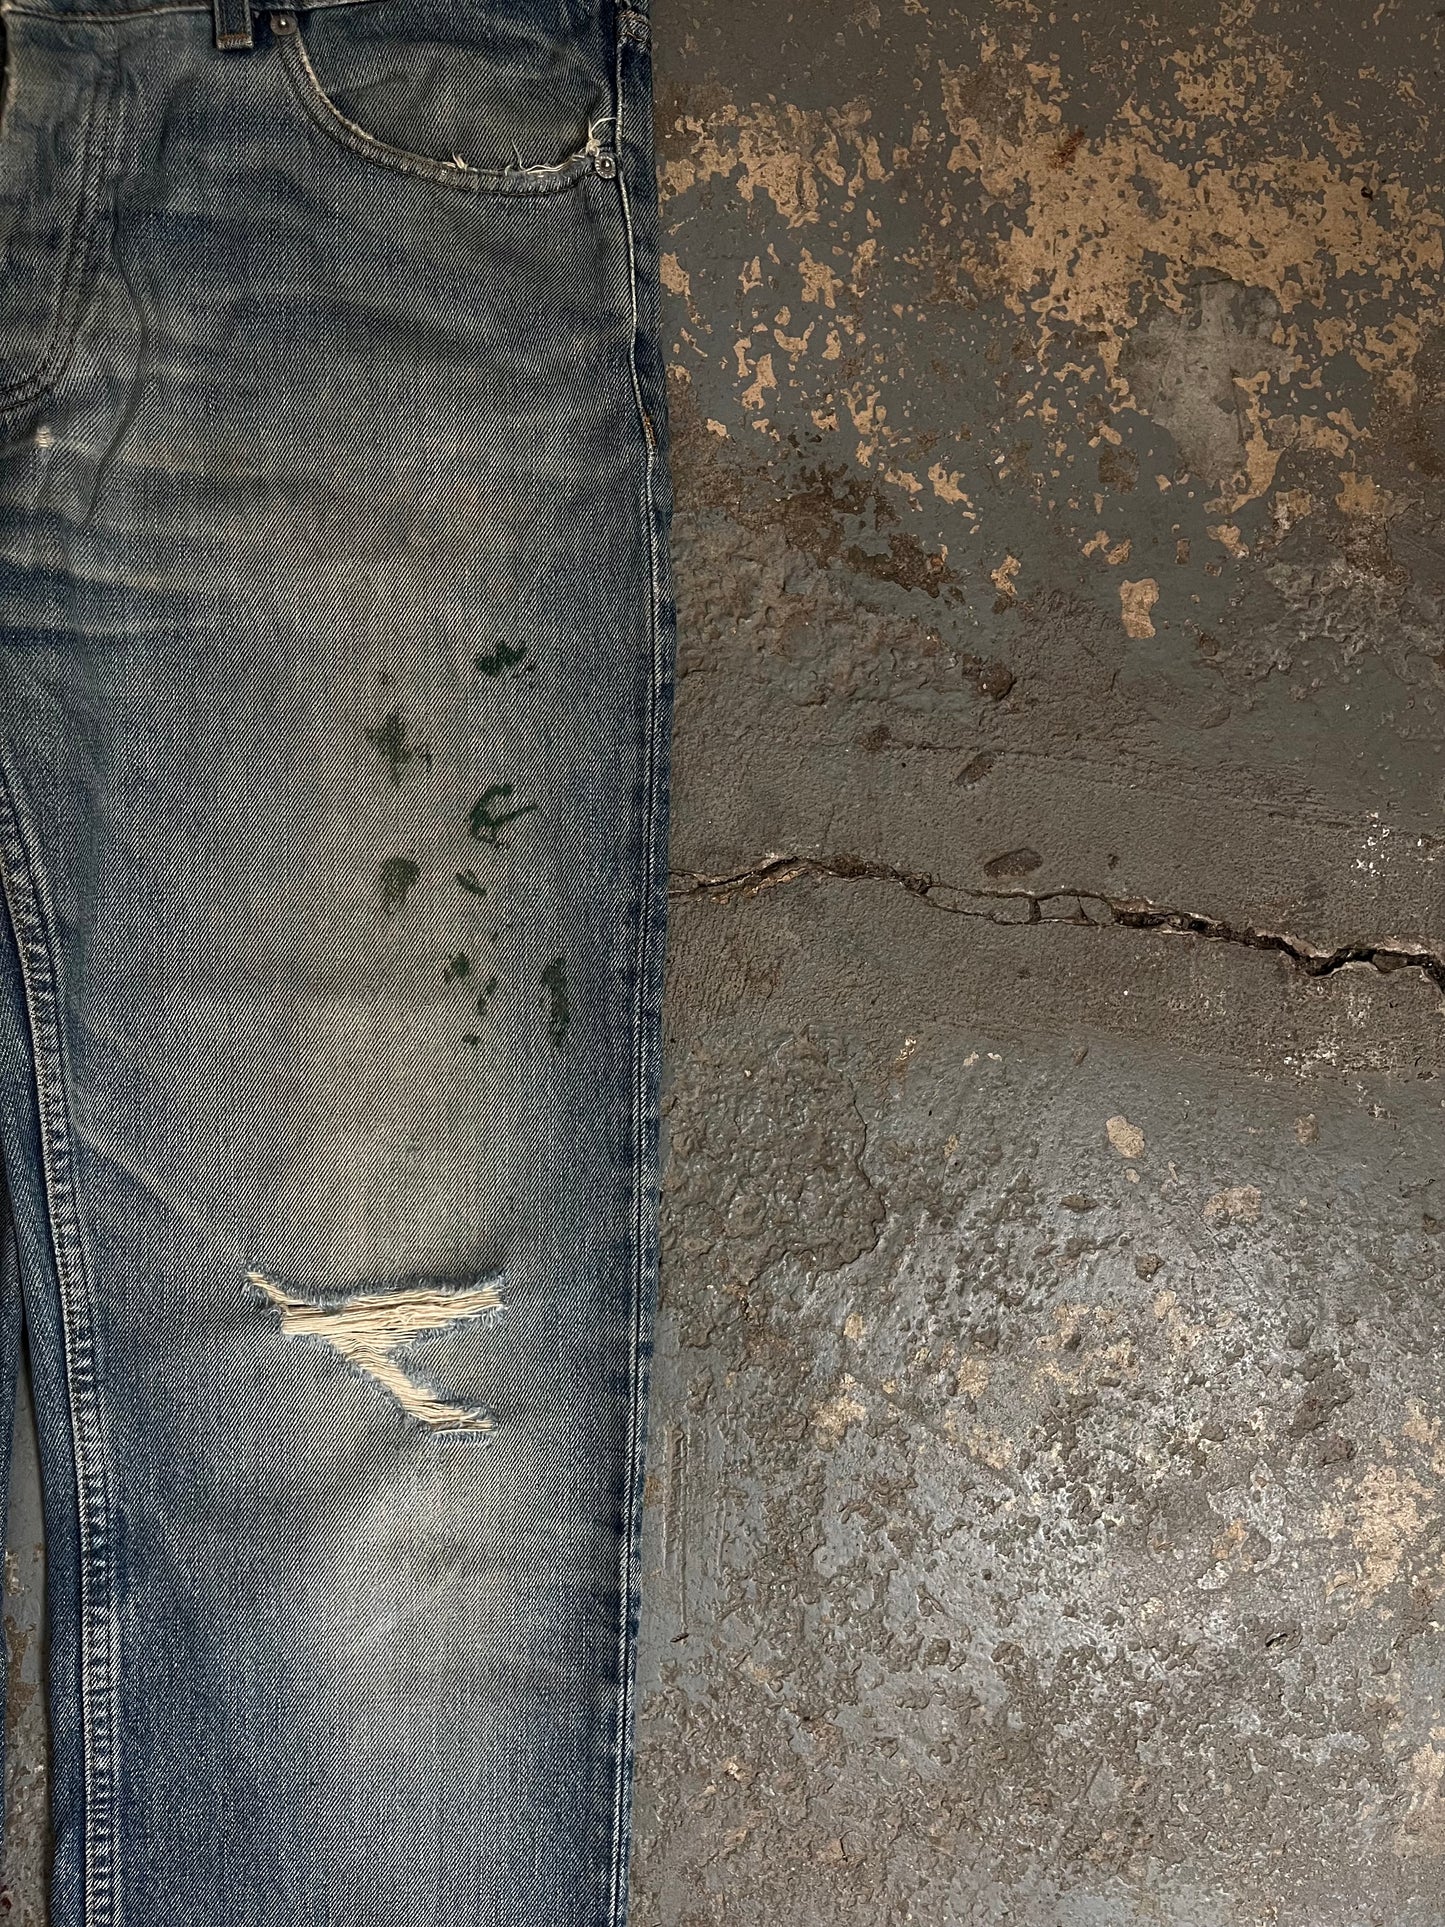 Helmut Lang SS00 Green Painter Distressed Jeans